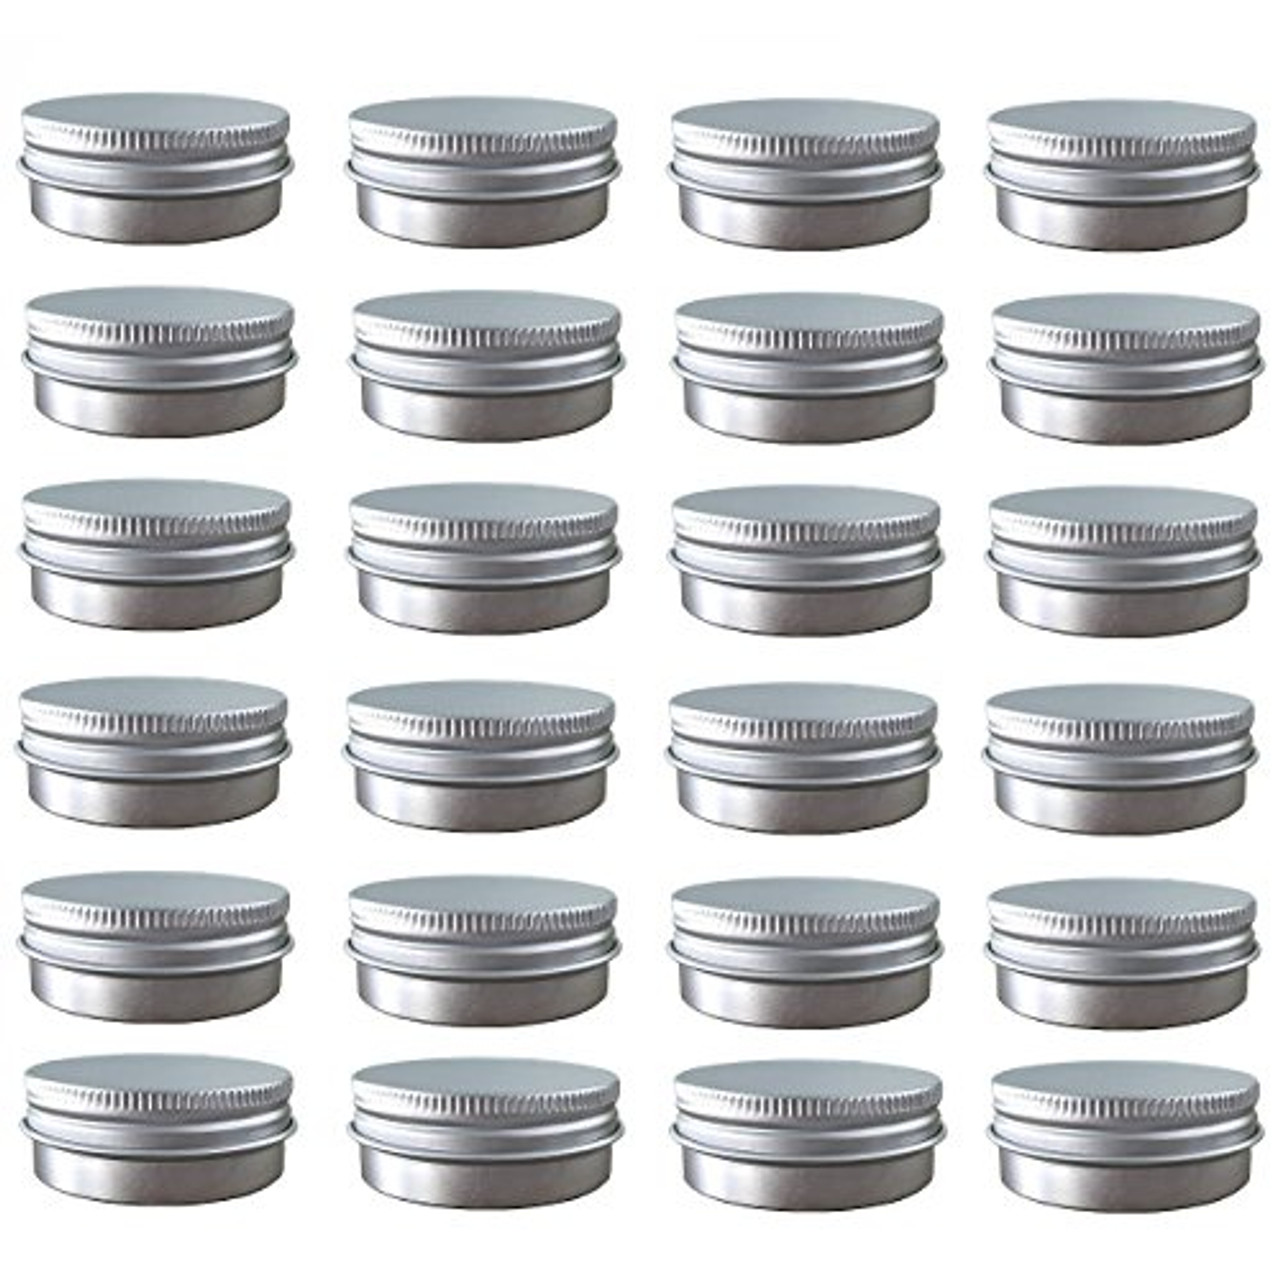 24 Pack (2 Oz/60ml) Screw Top Round Aluminum Tin Cans, Metal Tin Storage  Jar Containers with Screw Cap for Lip Balm, Cosmetic, Candles, Salve, Make  Up, Eye Shadow, Powder, Tea